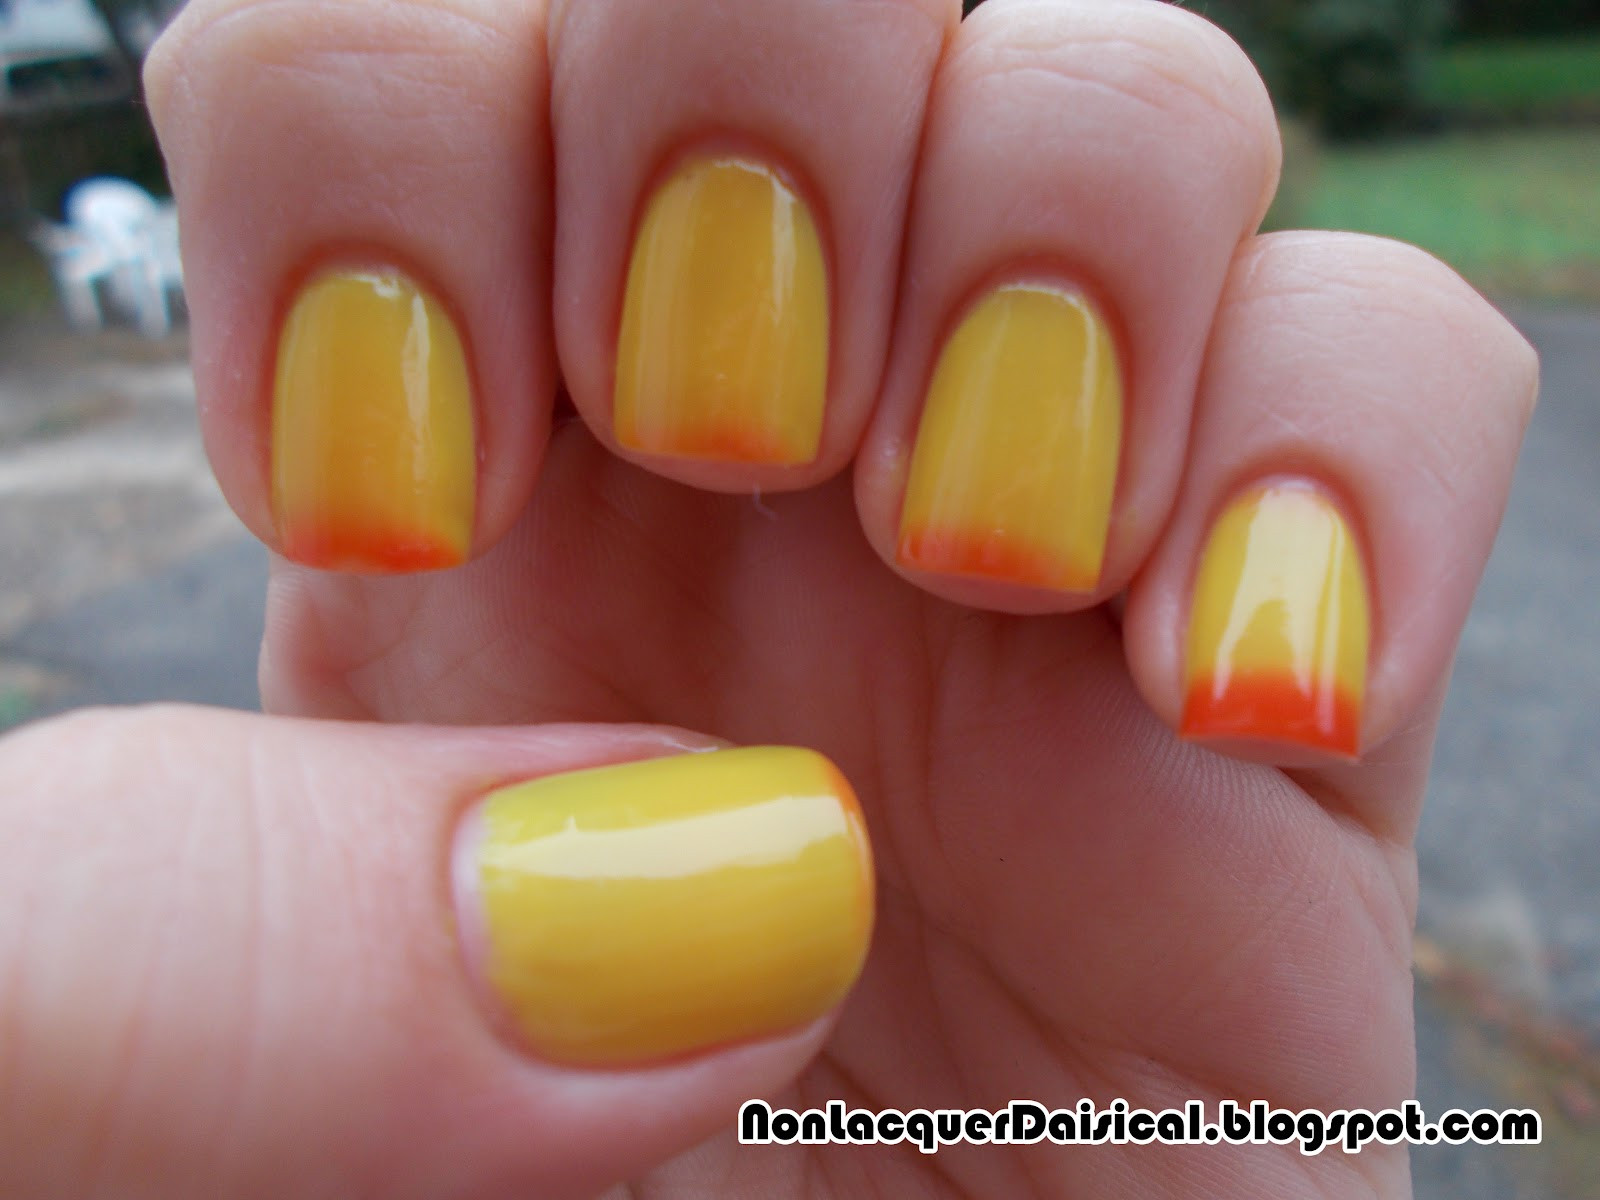 Candy Corn Colors
 NonLacquerDaisical Pretty & Polished Candy Corn Color